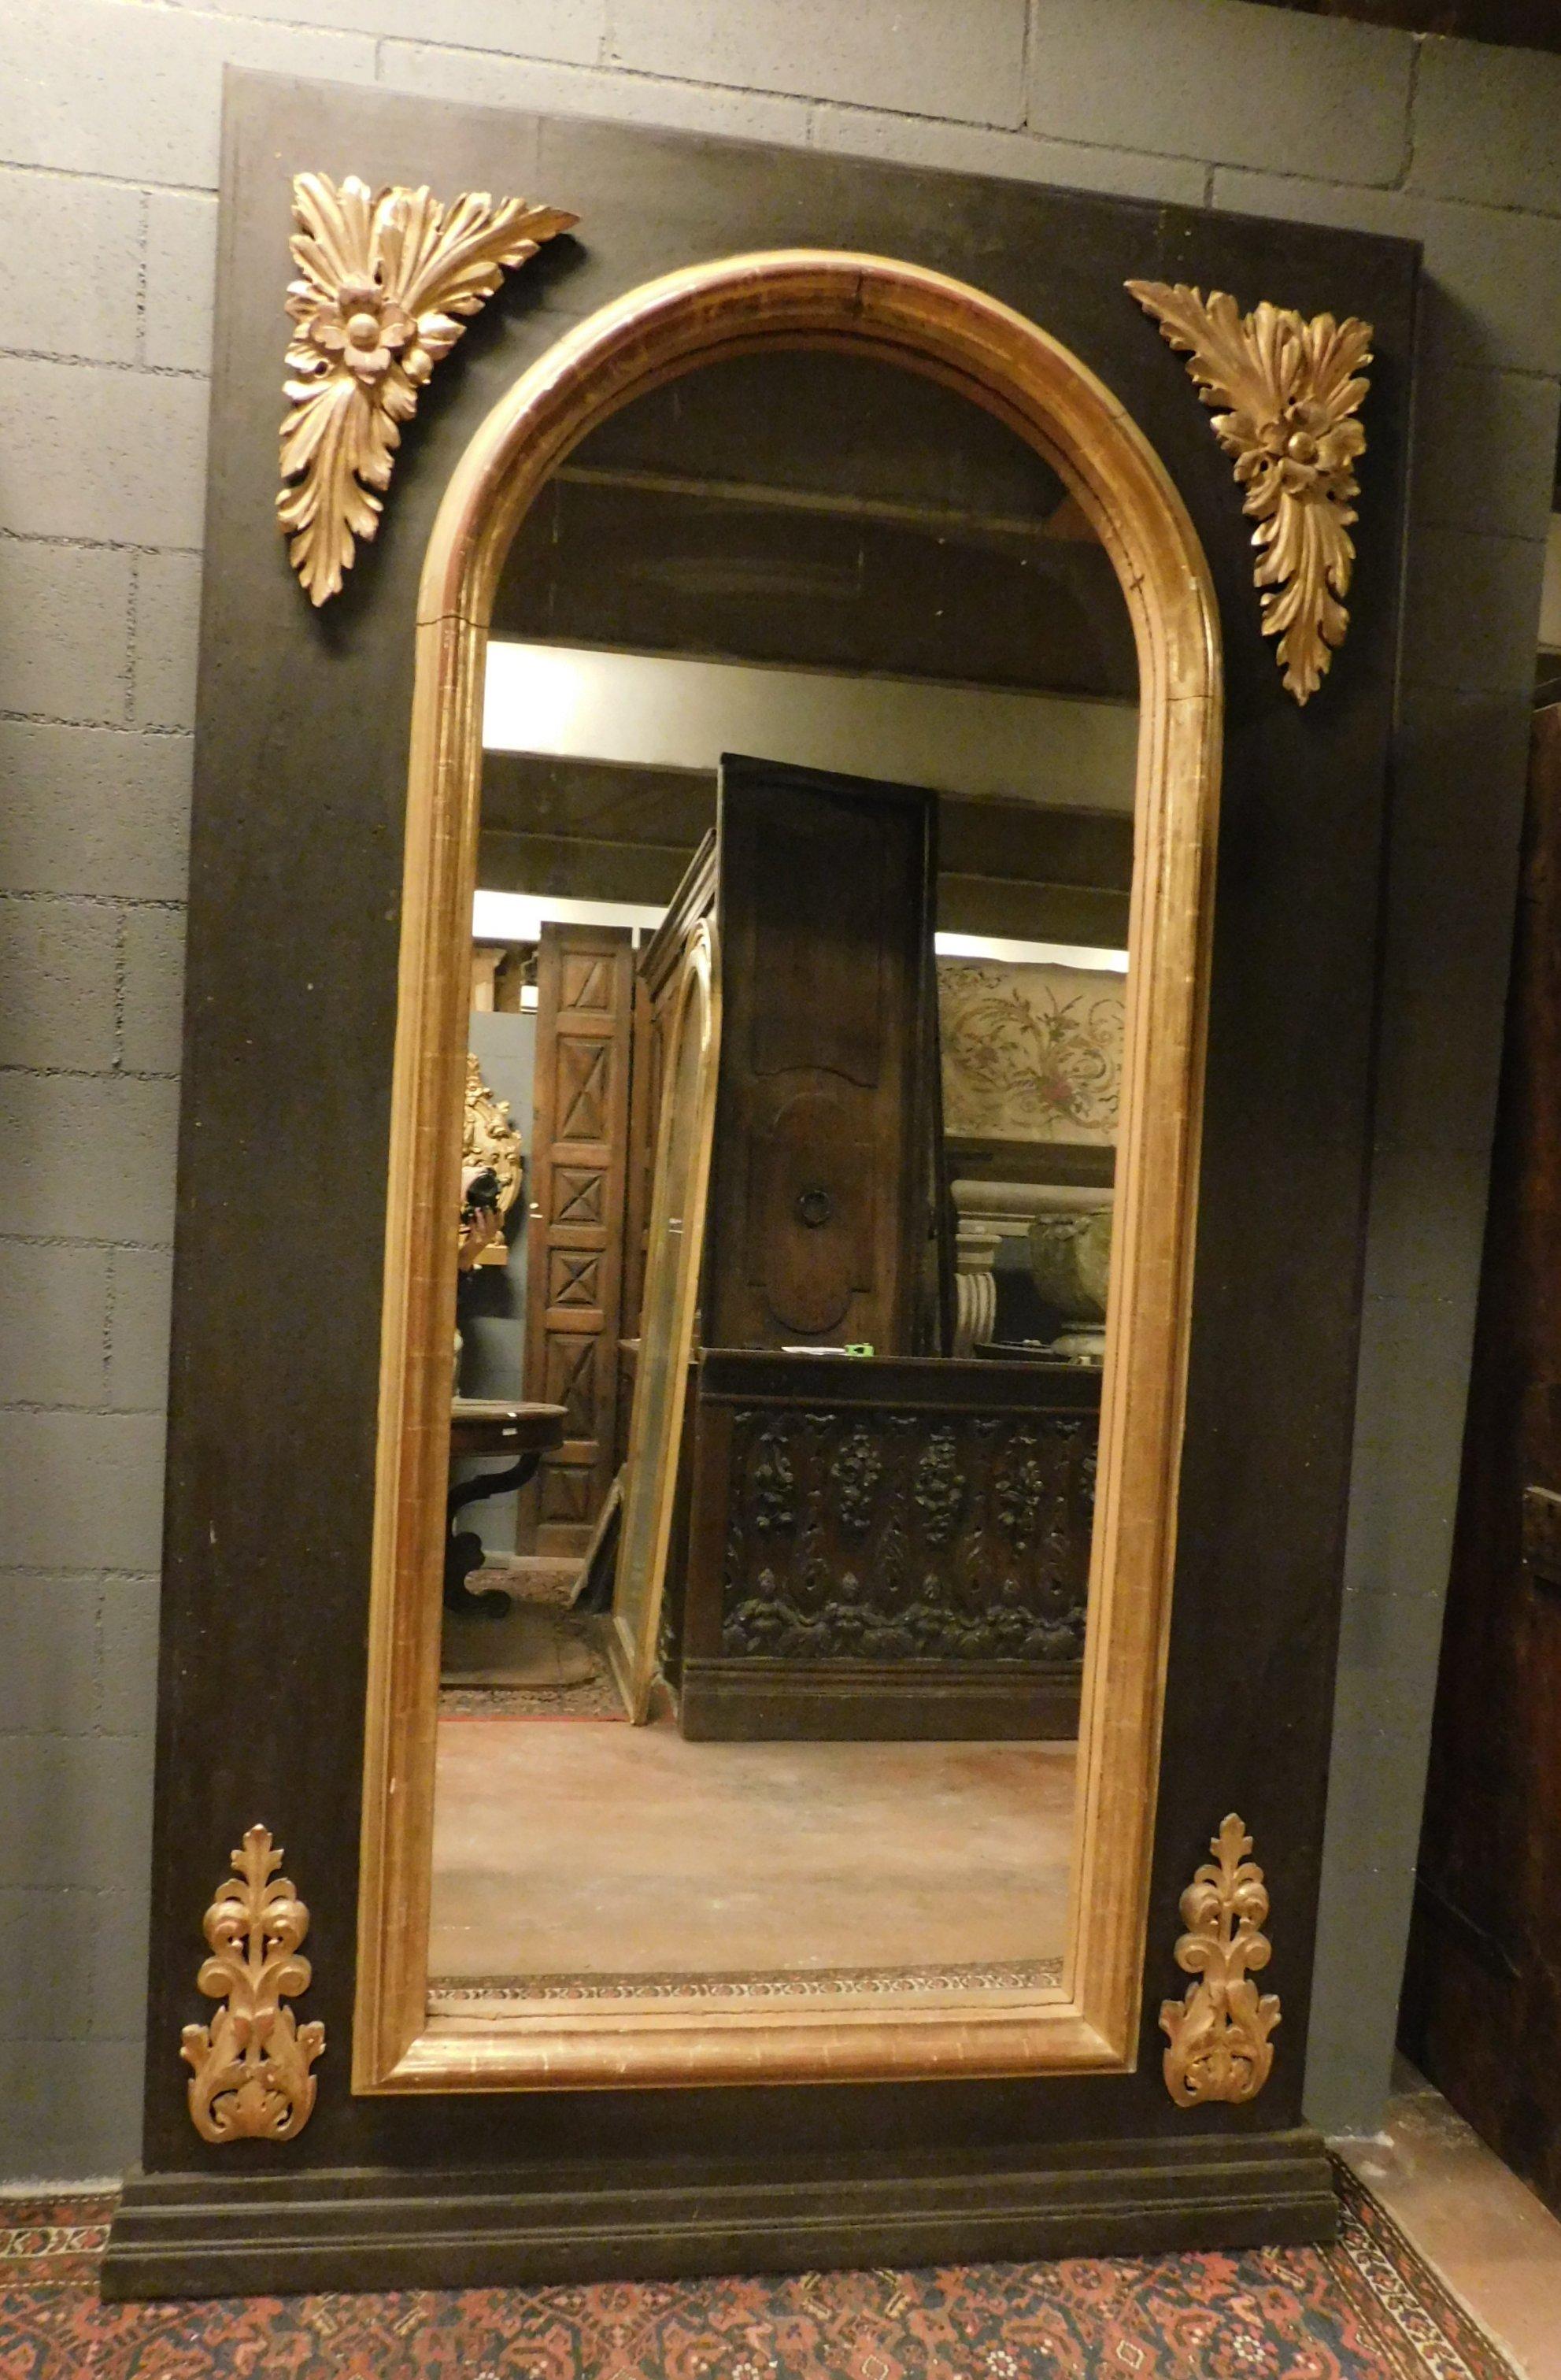 Antique black lacquered mirror, with golden decorations friezes, ancient well preserved original. Originally it was placed over a fireplace, in a house with high ceilings, it can now be placed on the ground or on the wall, ideal also in the bathroom